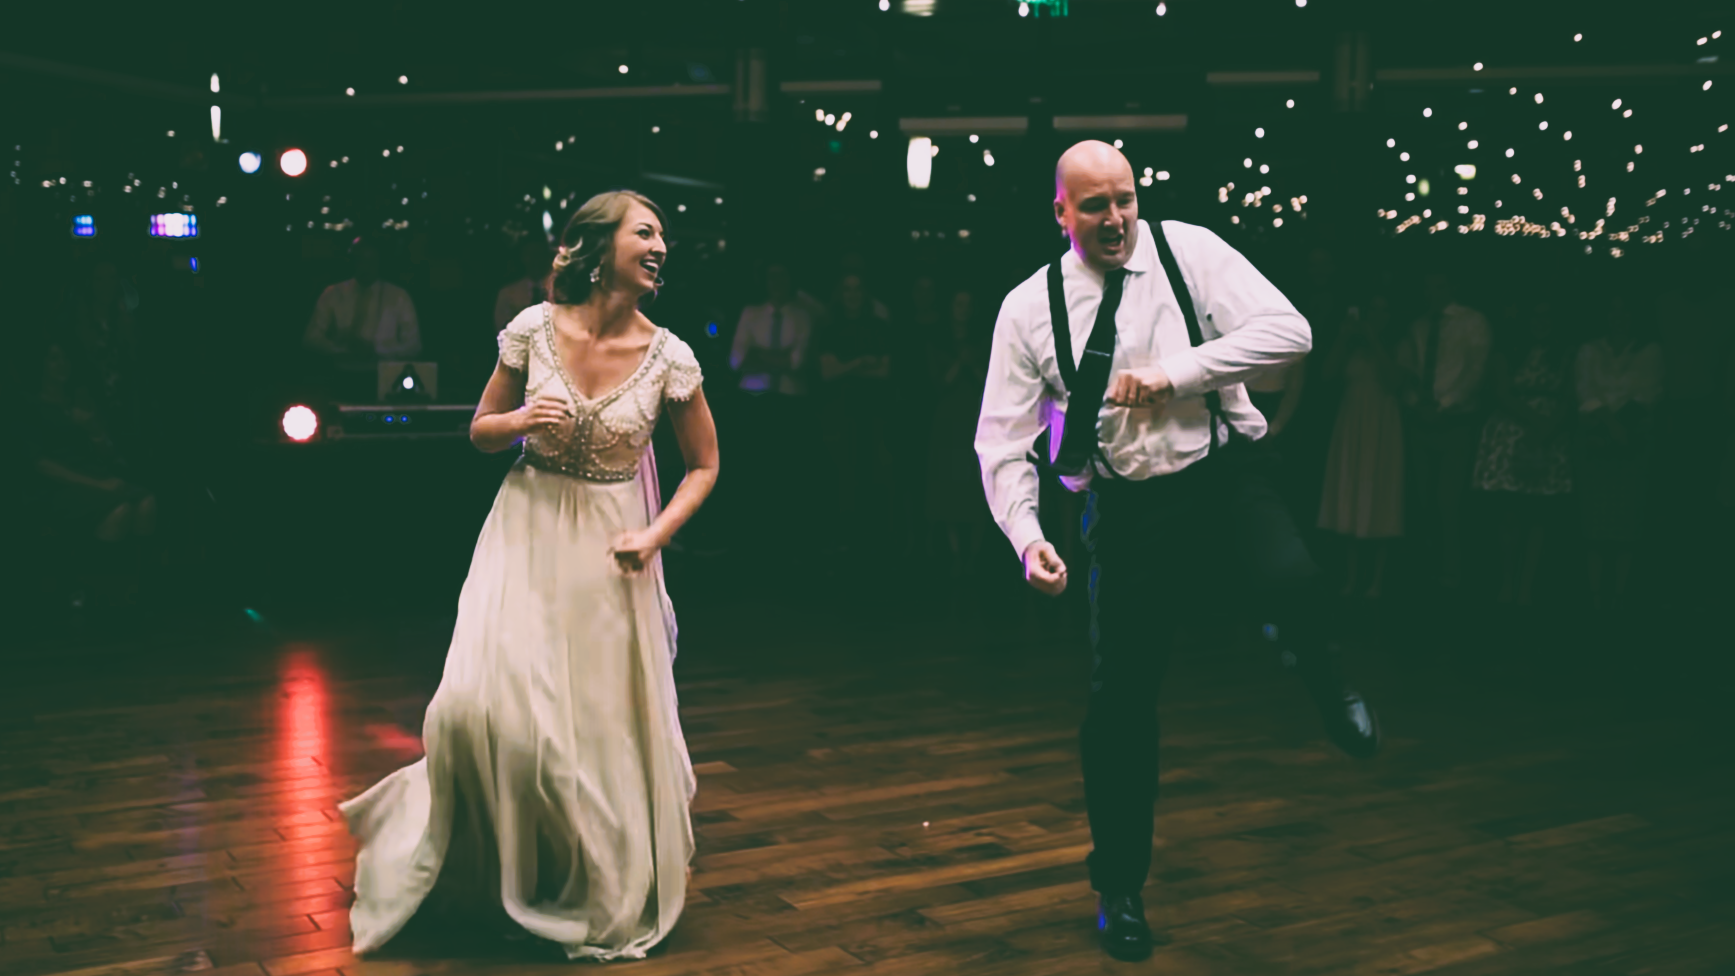 Image for the blog: 6 Things You Should Know About The Father Daughter Dance